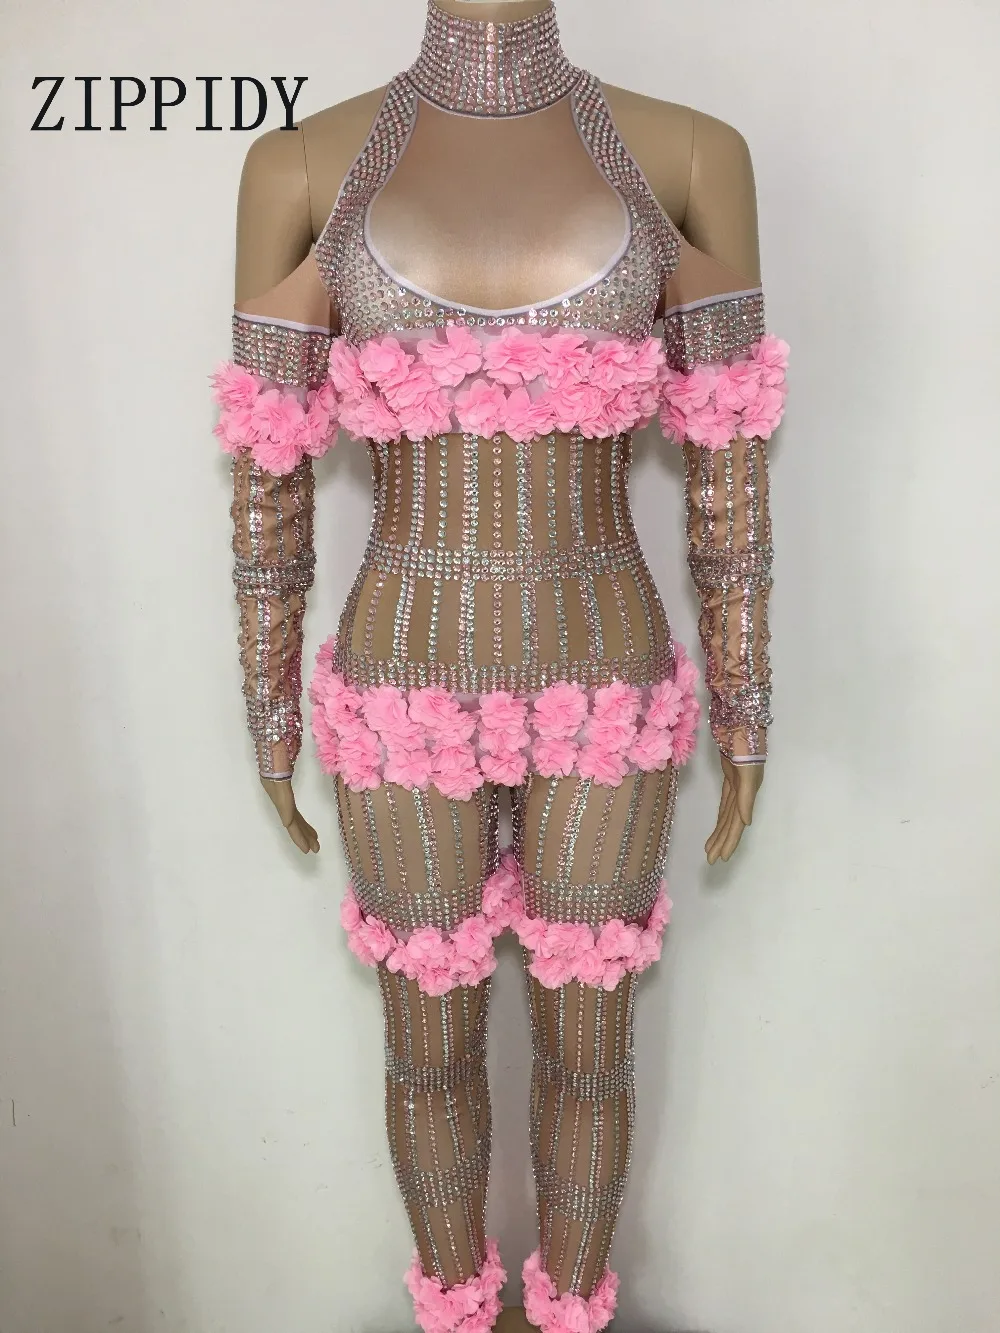 MOMO 2018-6-19 17:05:40 Pink Flowers Rhinestones Jumpsuit Spandex Big Stretch Bodysuit Costume Women's Outfit Stage We